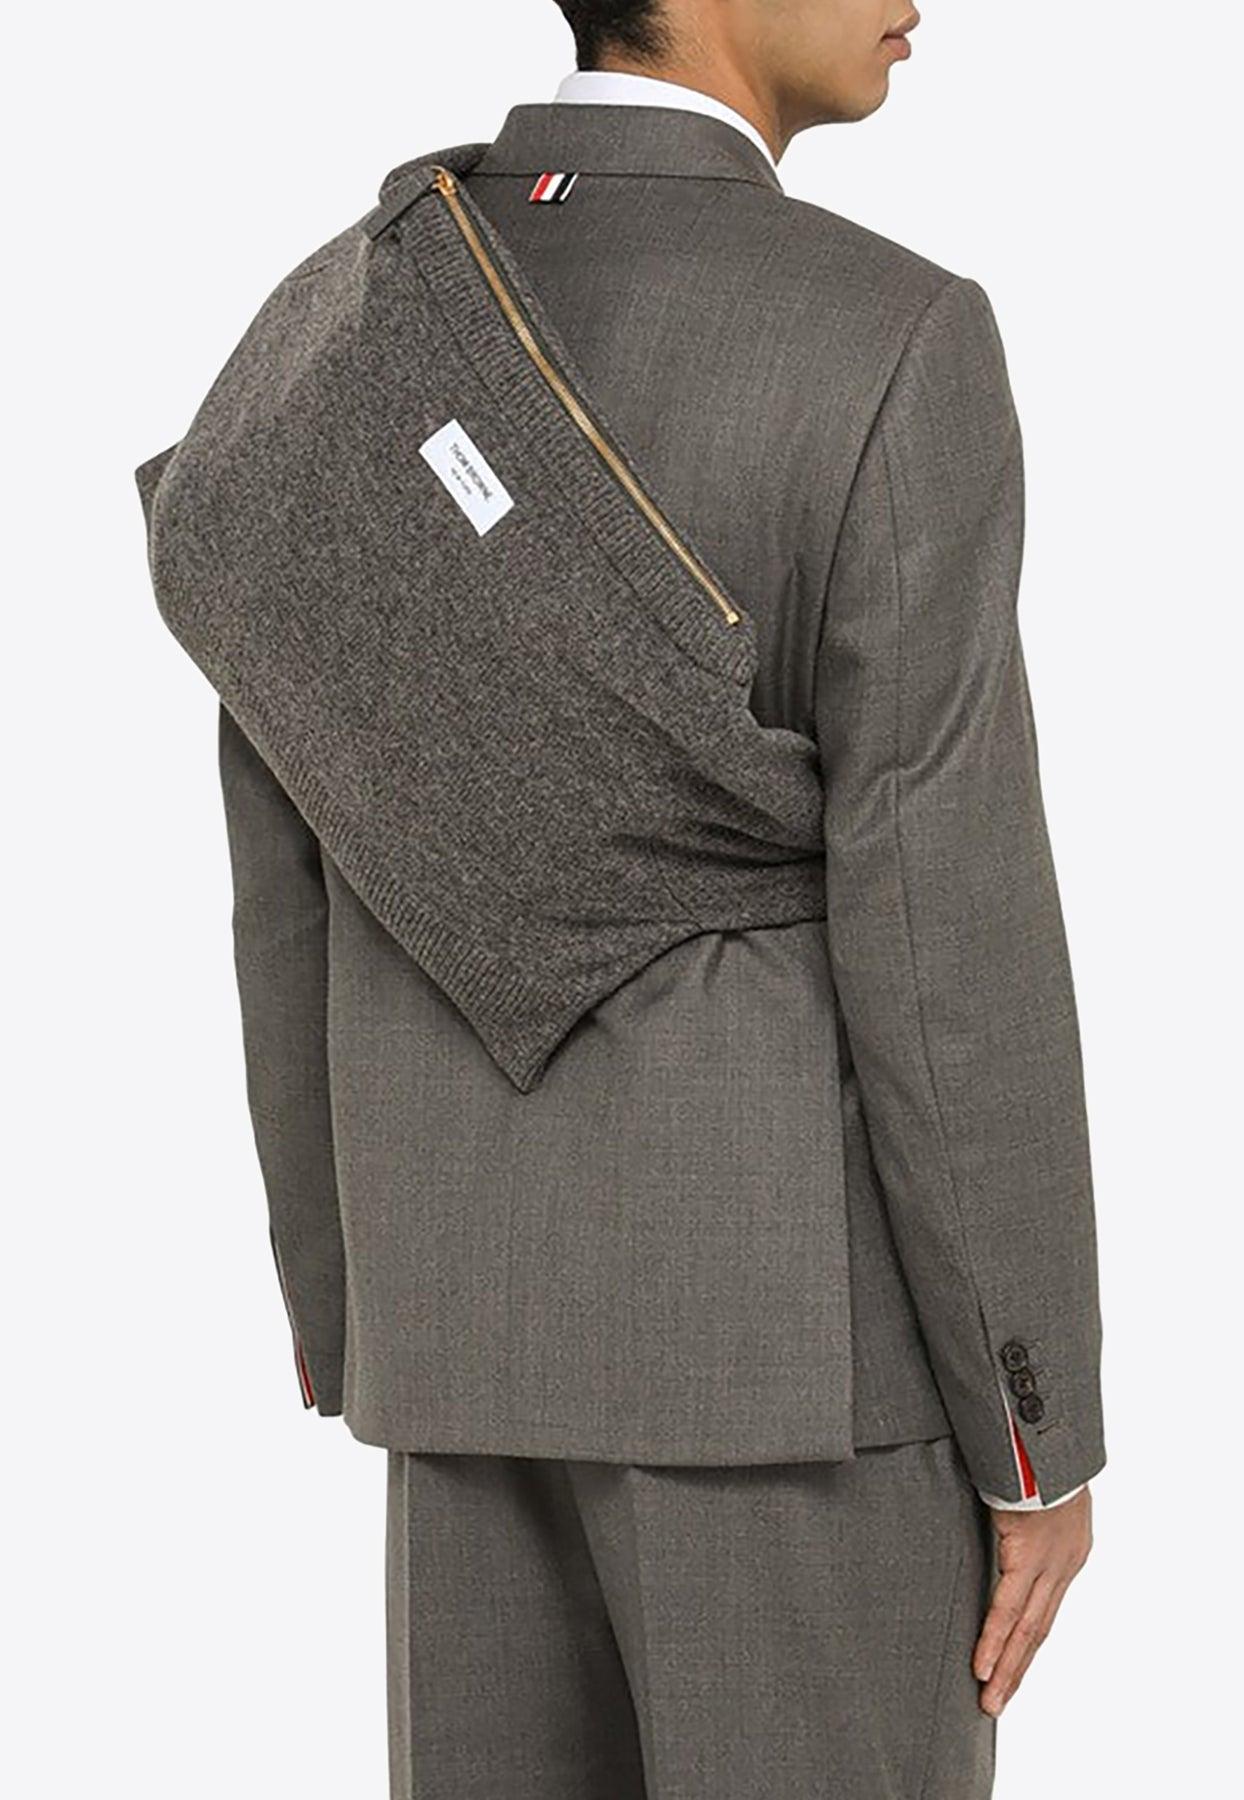 Wutrye 40 Garment Bags for Travel, Suits Bag with India | Ubuy